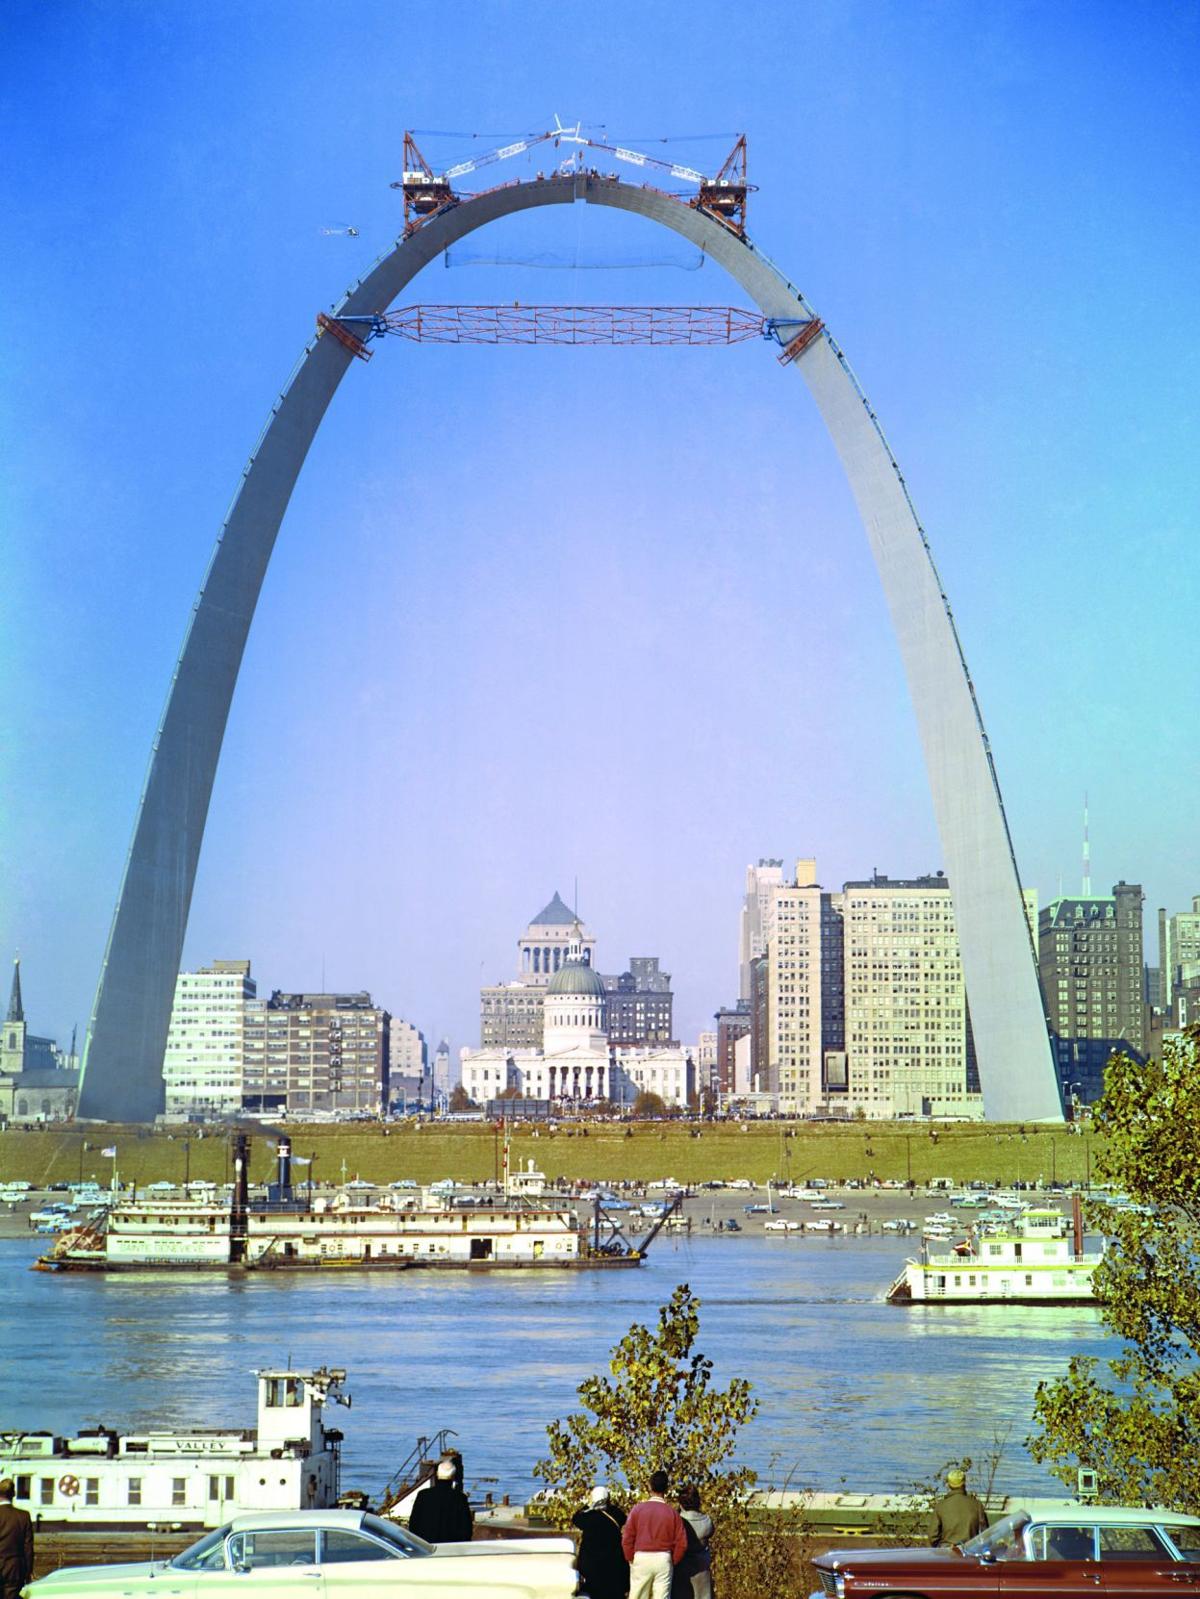 Tram rides taking visitors to top of Gateway Arch resume today | Metro | www.strongerinc.org